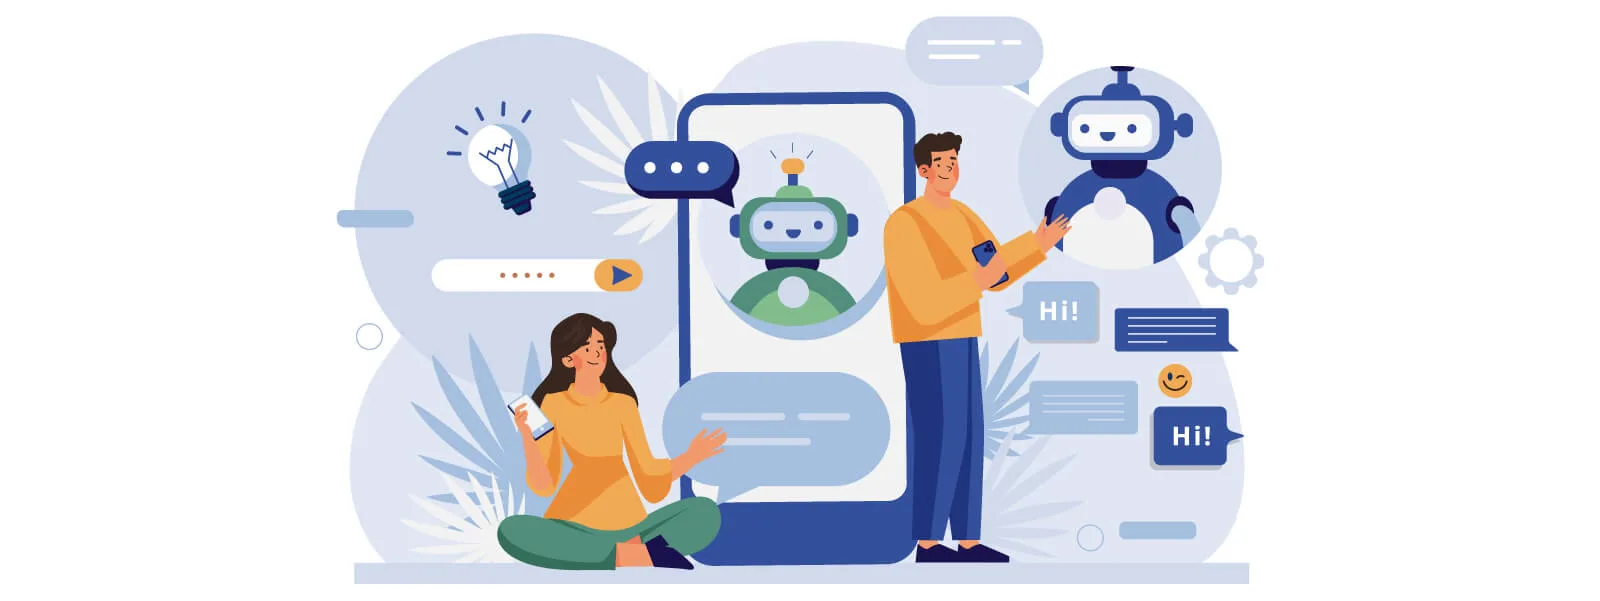 chatbot trends and statistics